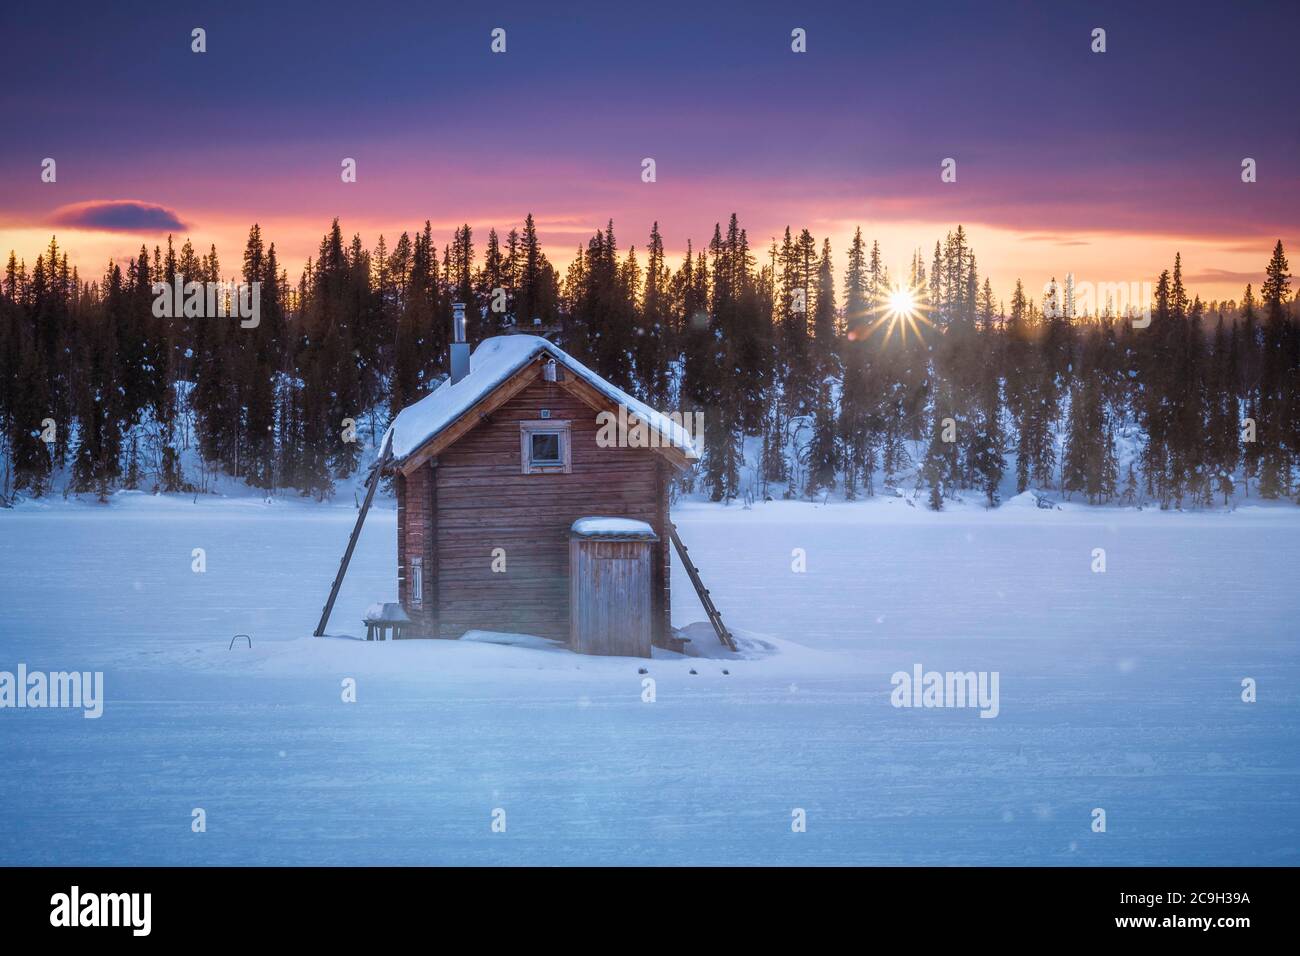 Small wooden hut against the light at extremely low temperatures at dawn, Skaulo, Norrbottens laen, Sweden Stock Photo